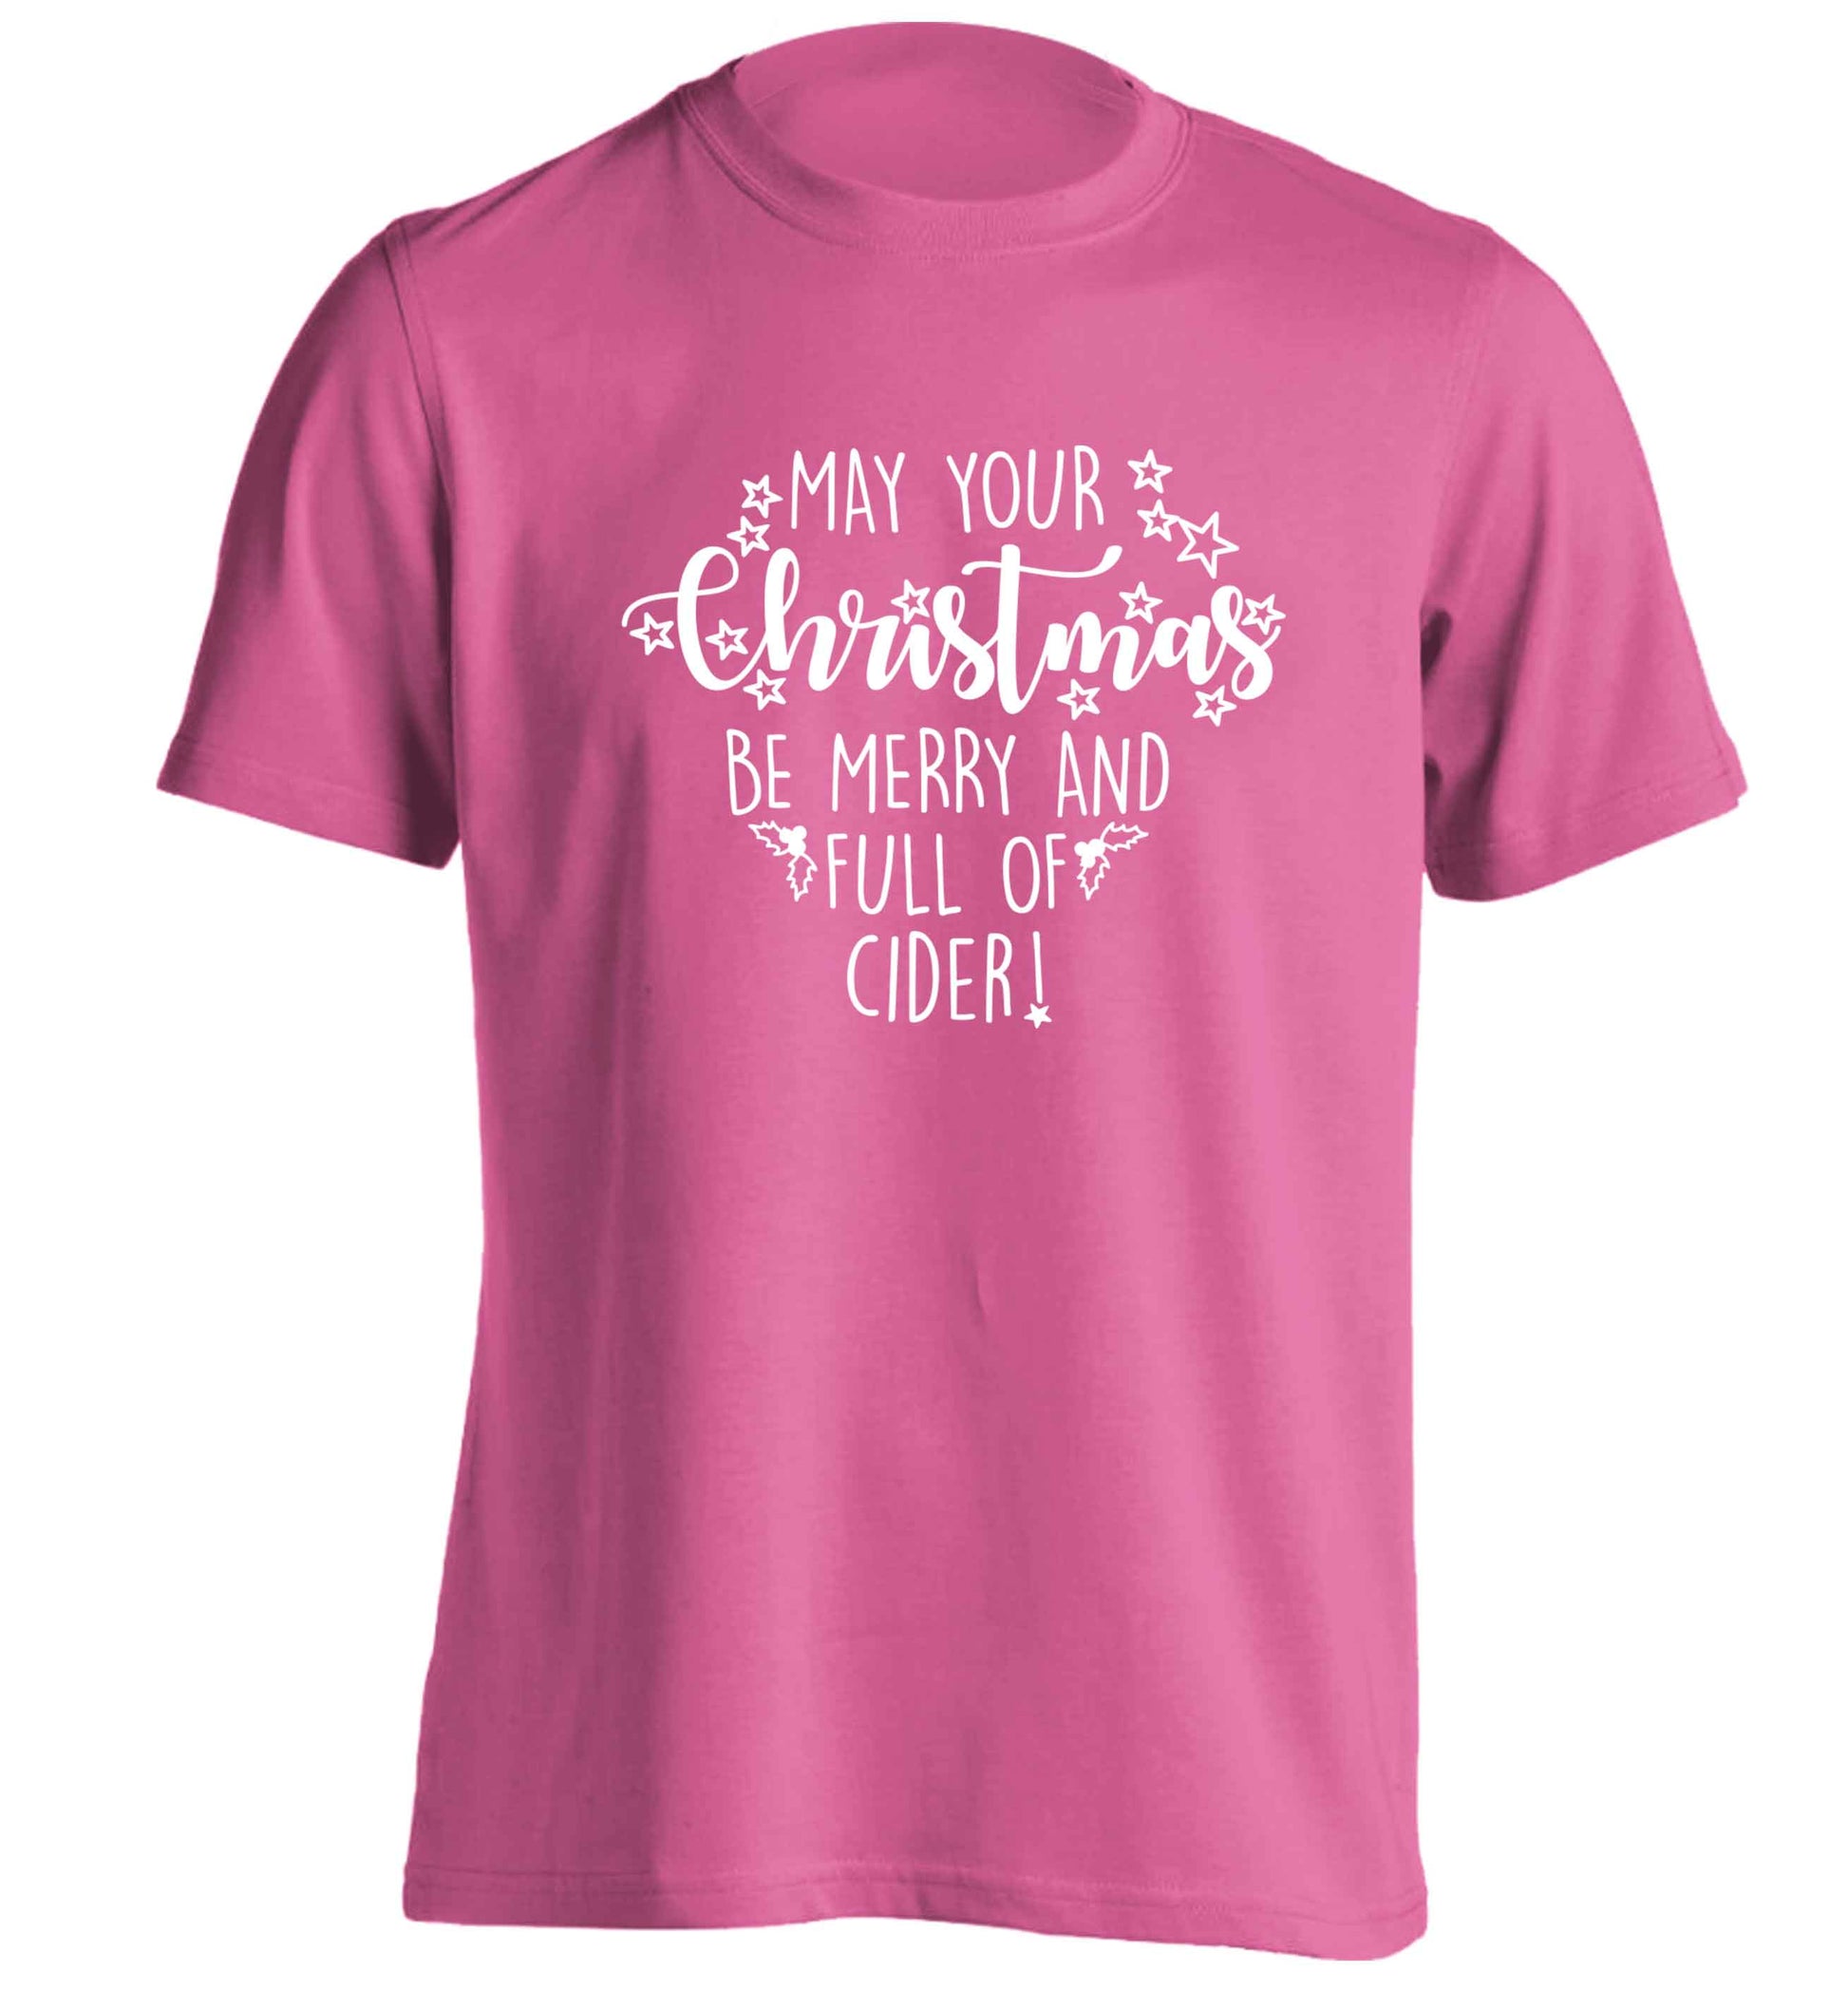 May your Christmas be merry and full of cider adults unisex pink Tshirt 2XL